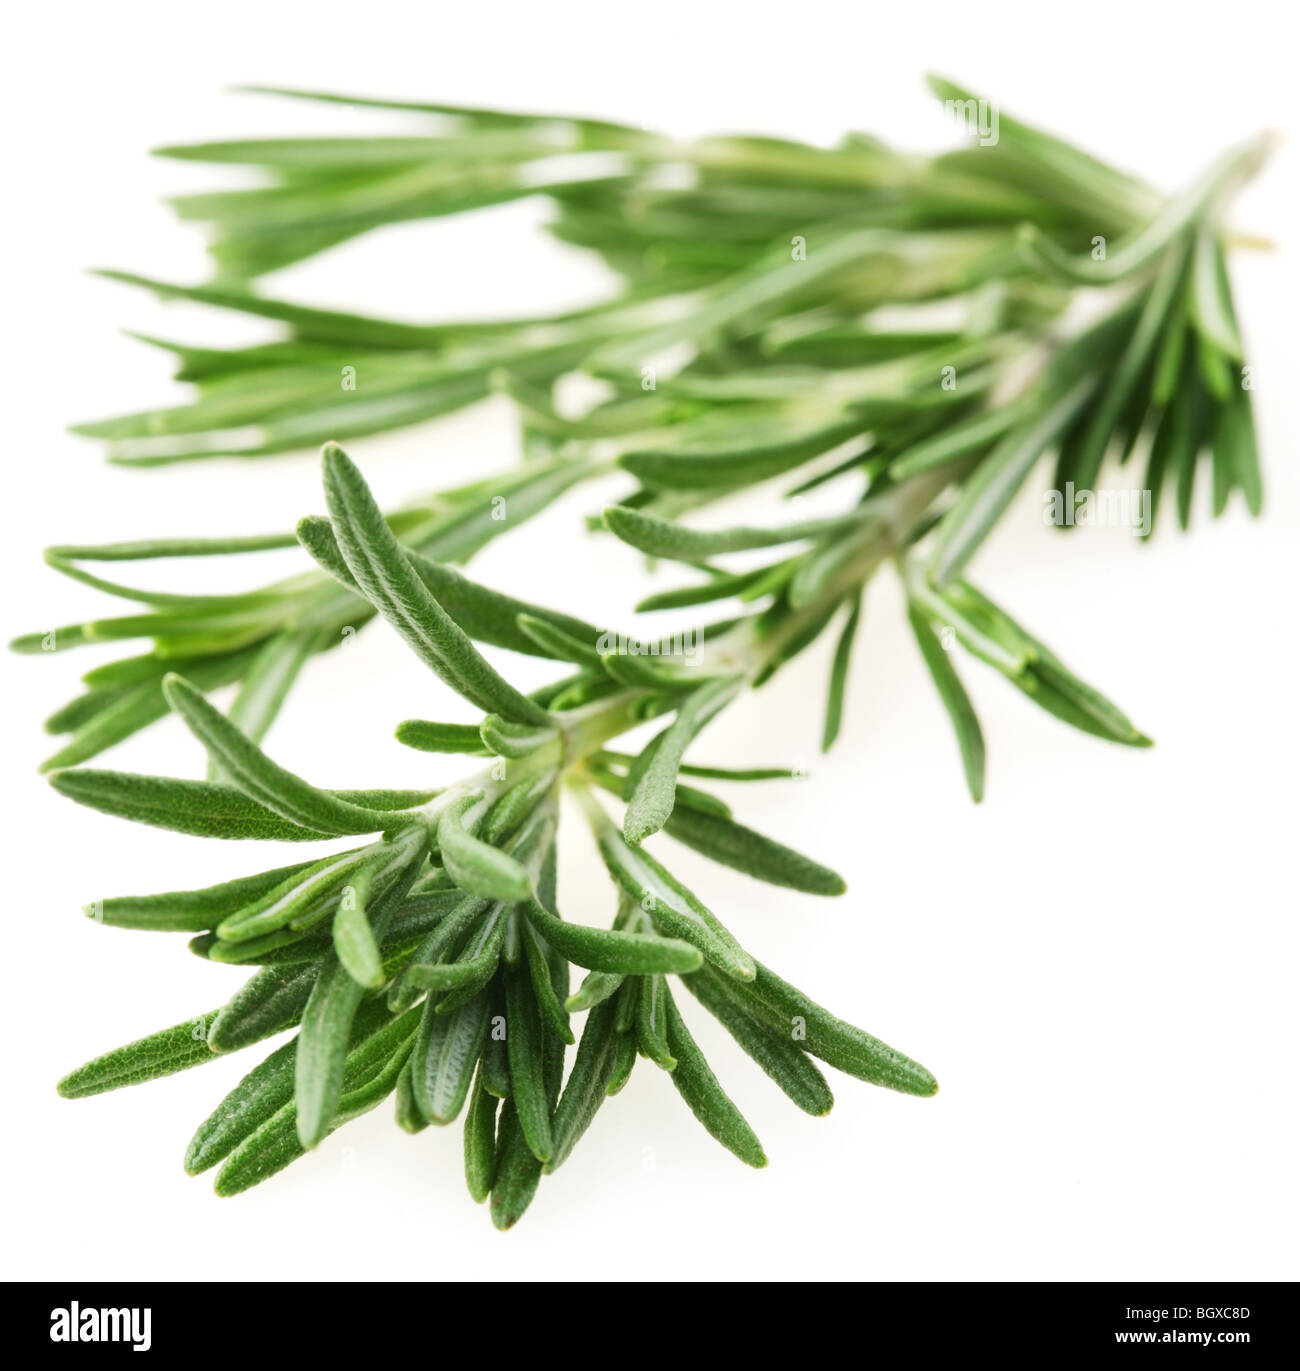 The branch of rosemary on a white background Stock Photo